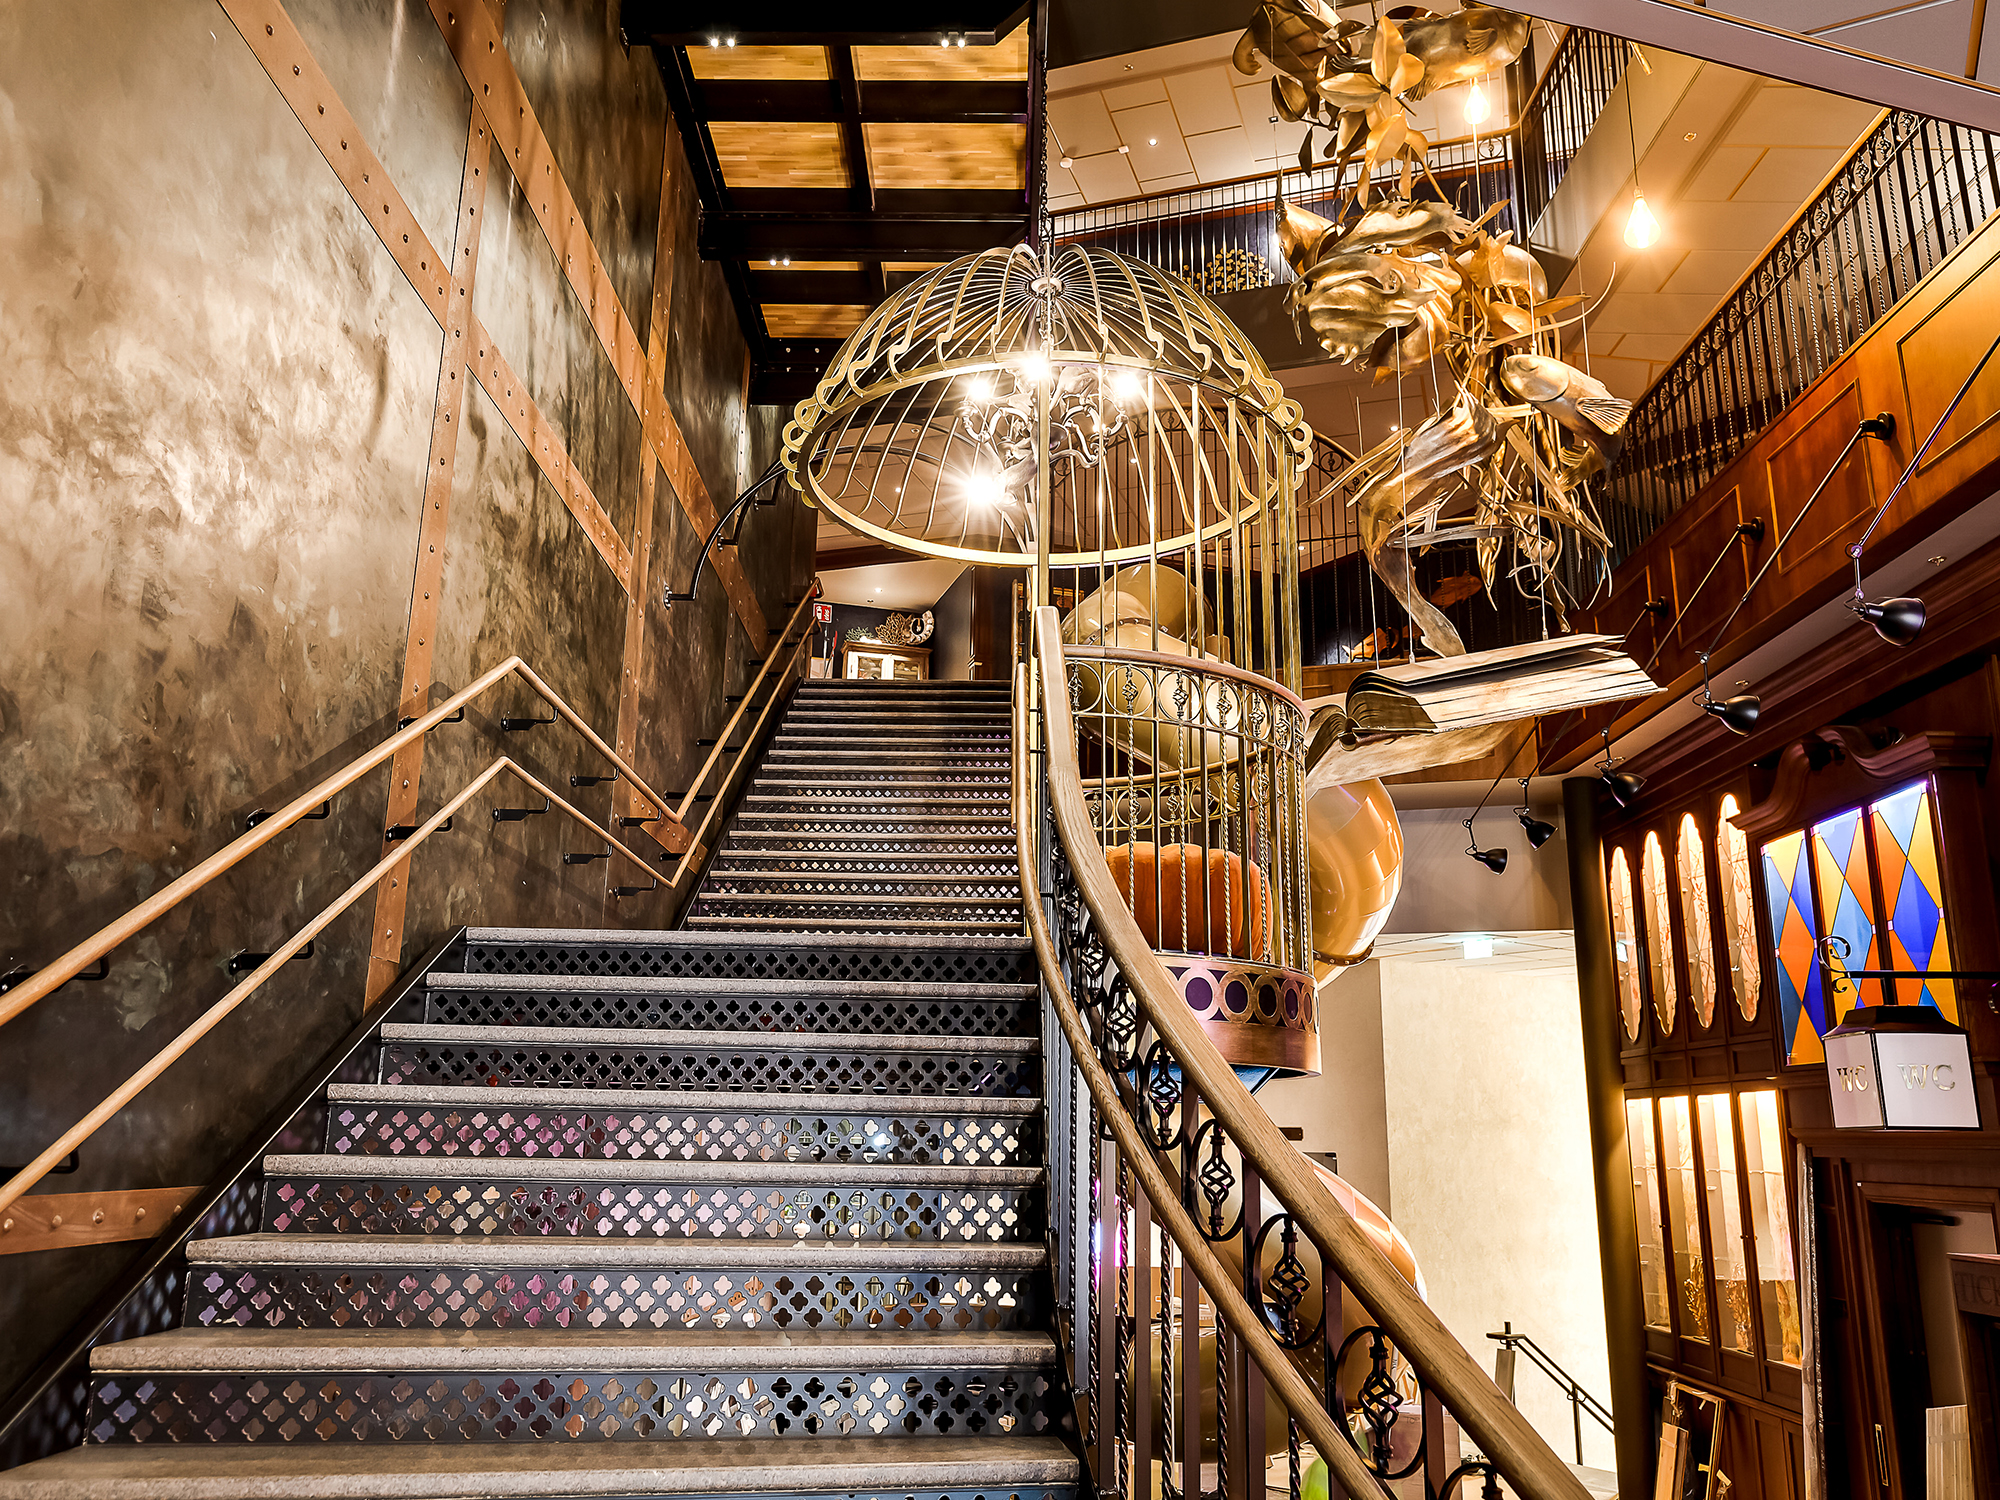 The stairwell at the Liseberg Grand Curiosa hotel in Gothenburg.